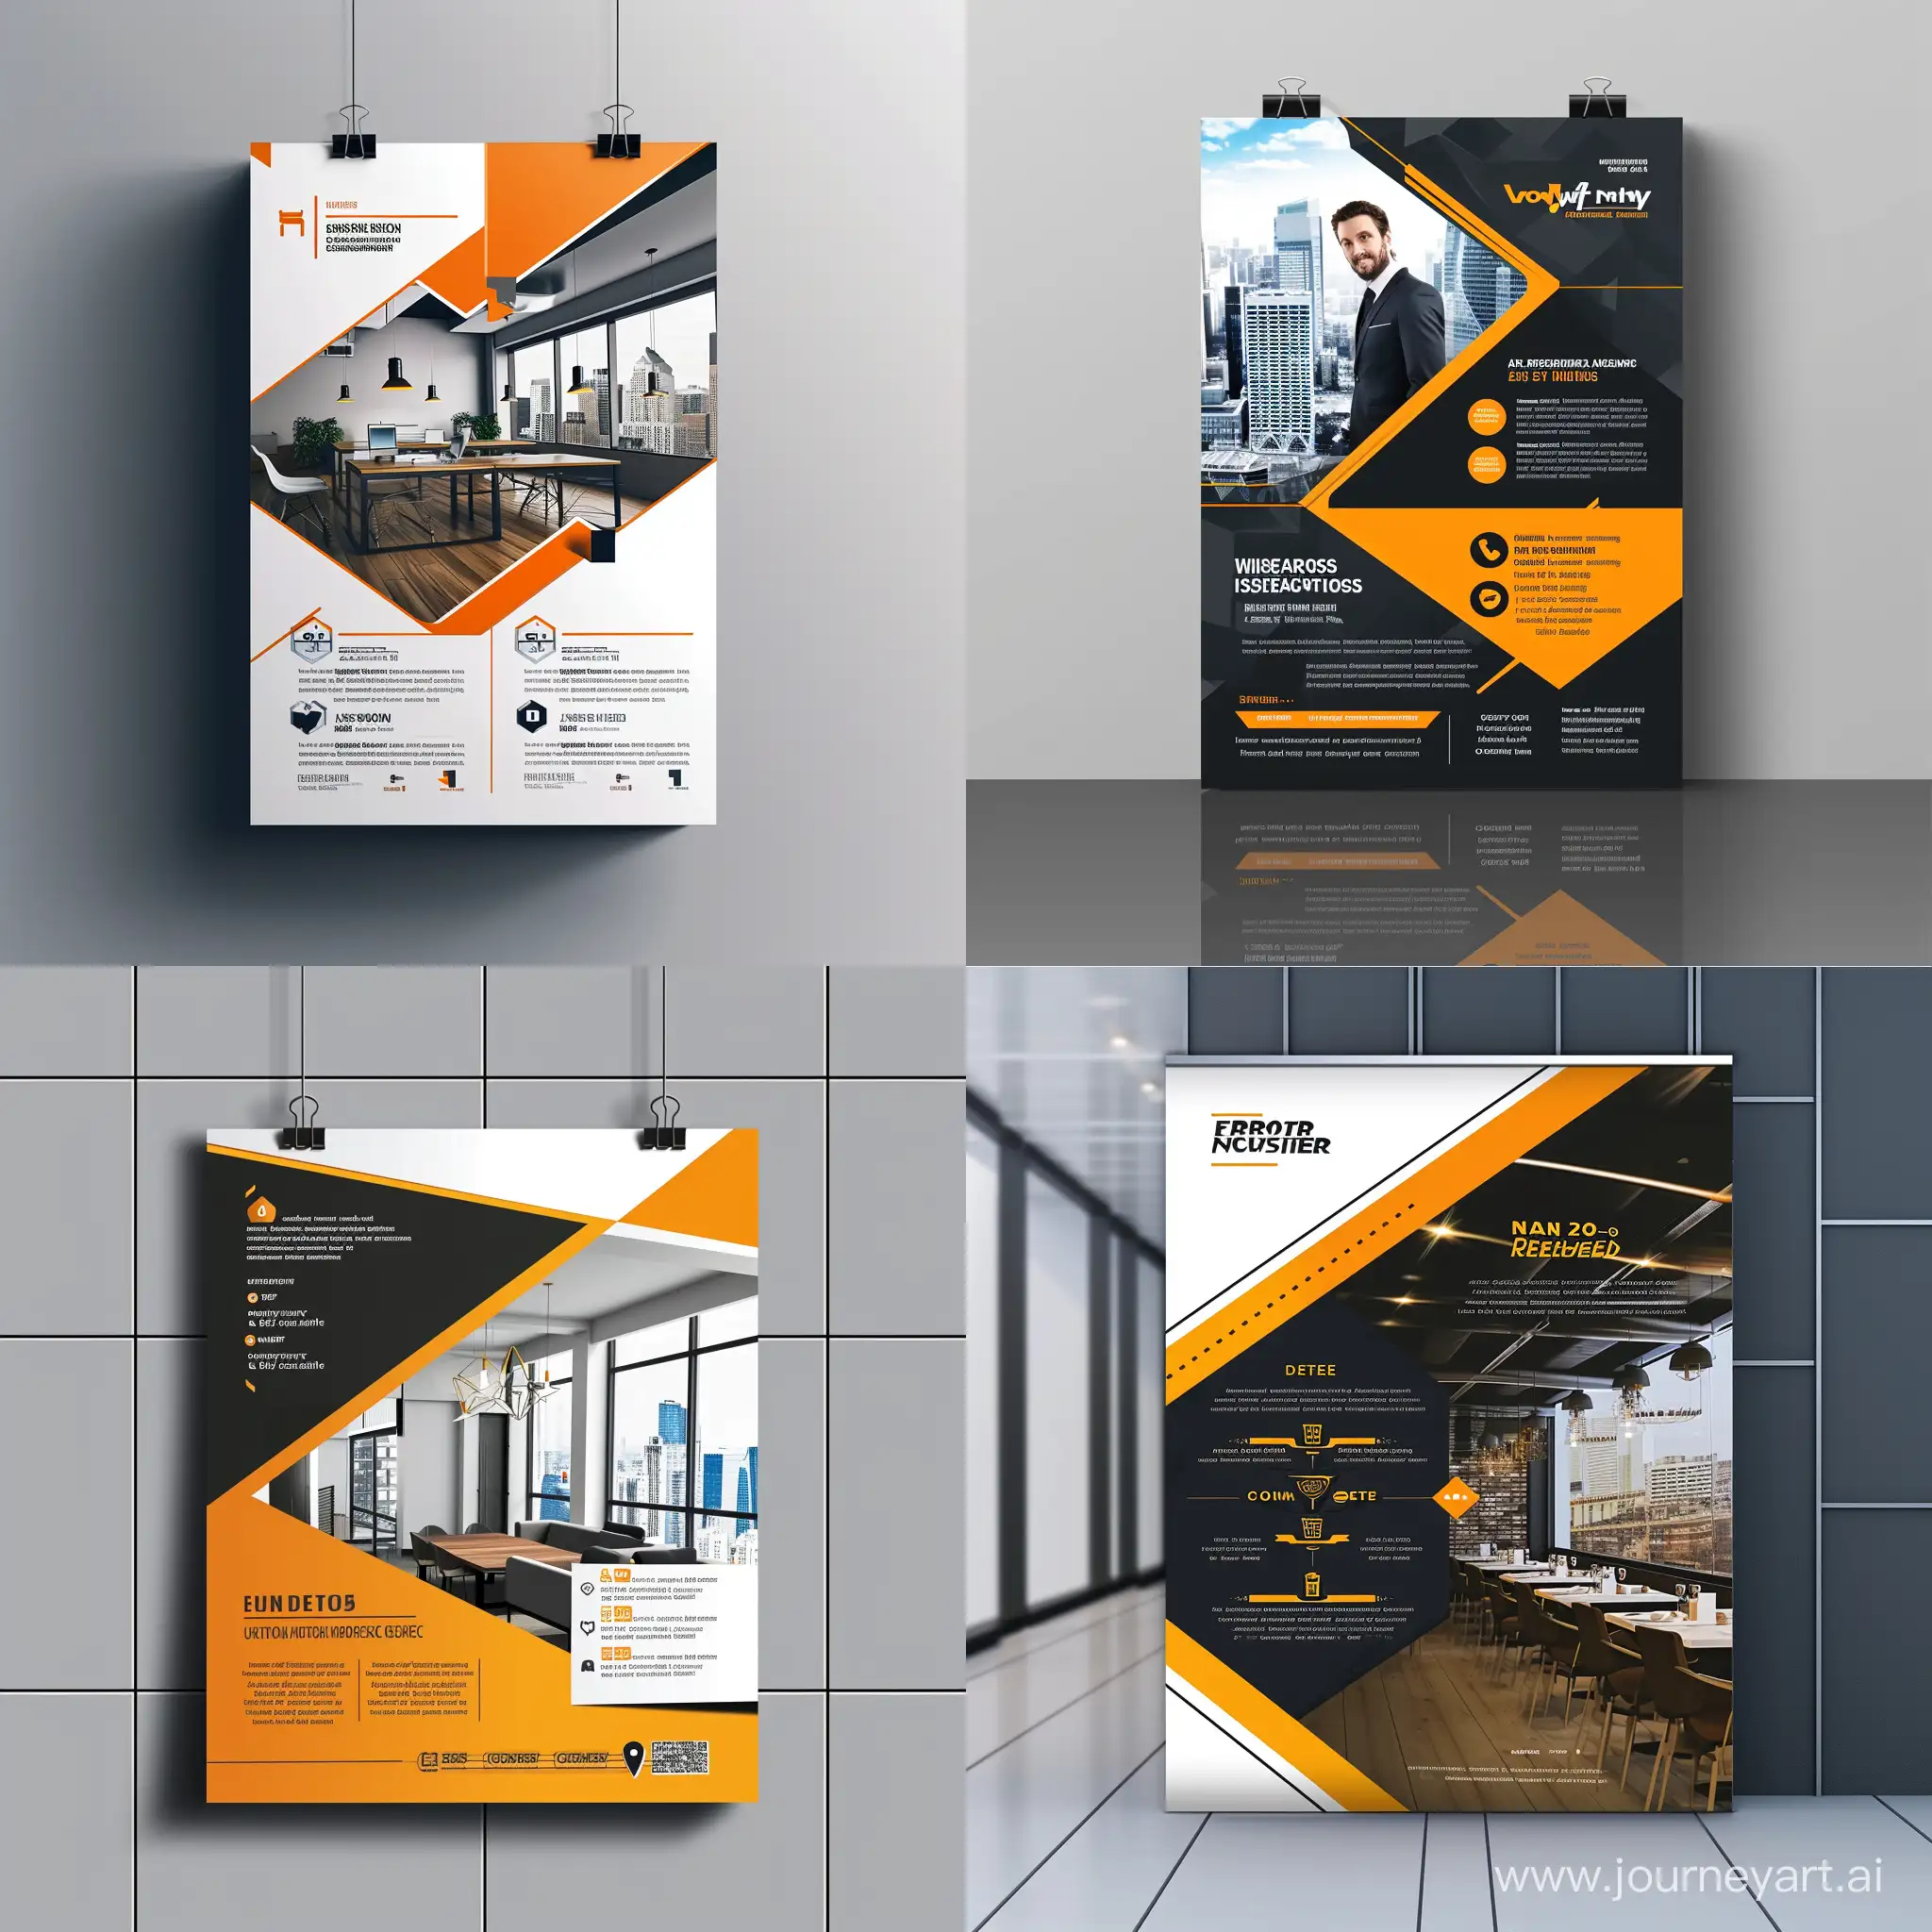 EyeCatching-24Hour-Business-Flyer-Design-with-Professional-Appeal